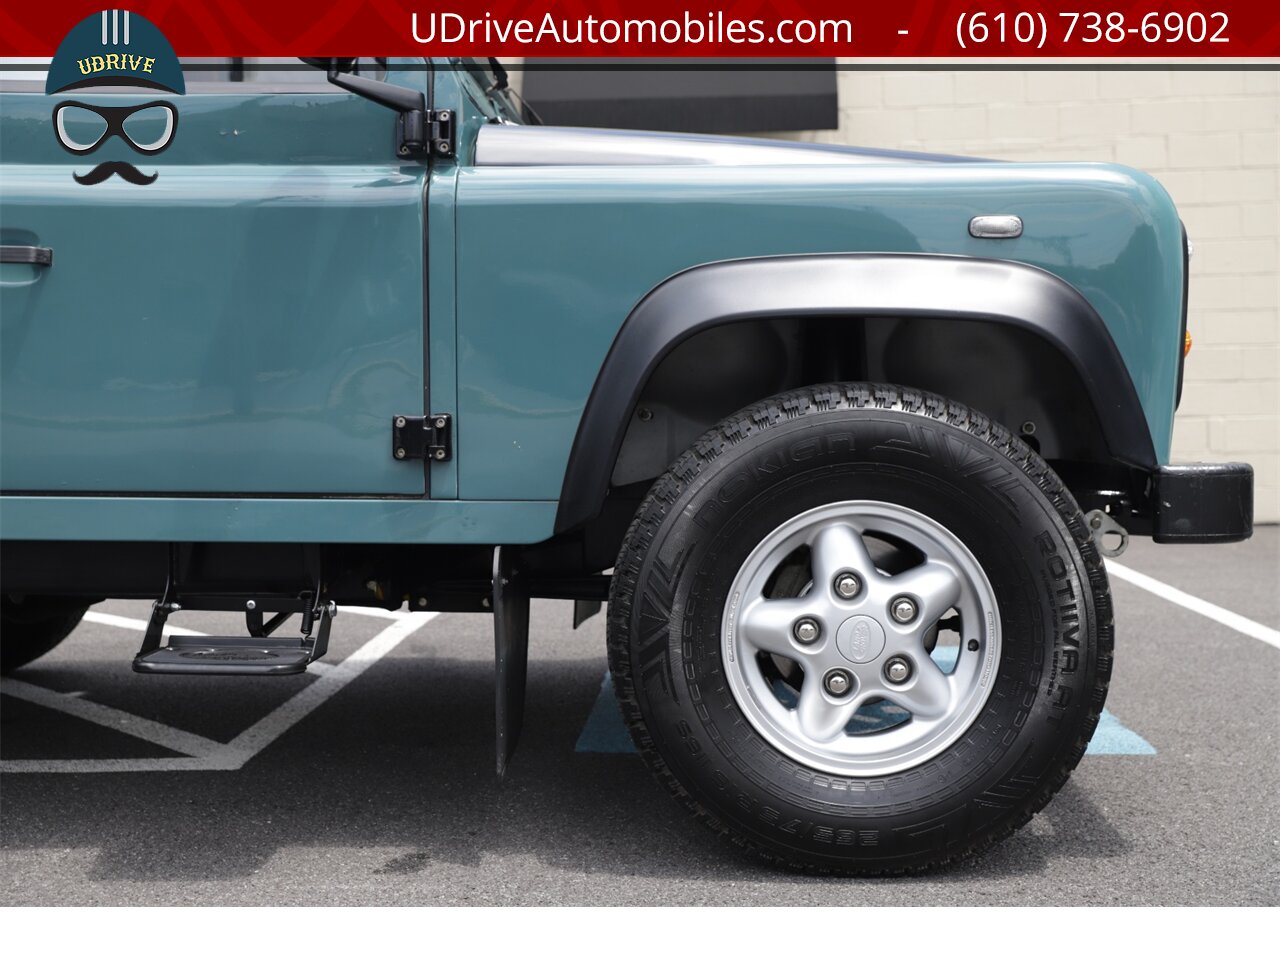 1986 Land Rover Defender 90 D90 4.0L V8 5 Speed Manual New Interior  $25k Recent Engine Build - Photo 16 - West Chester, PA 19382